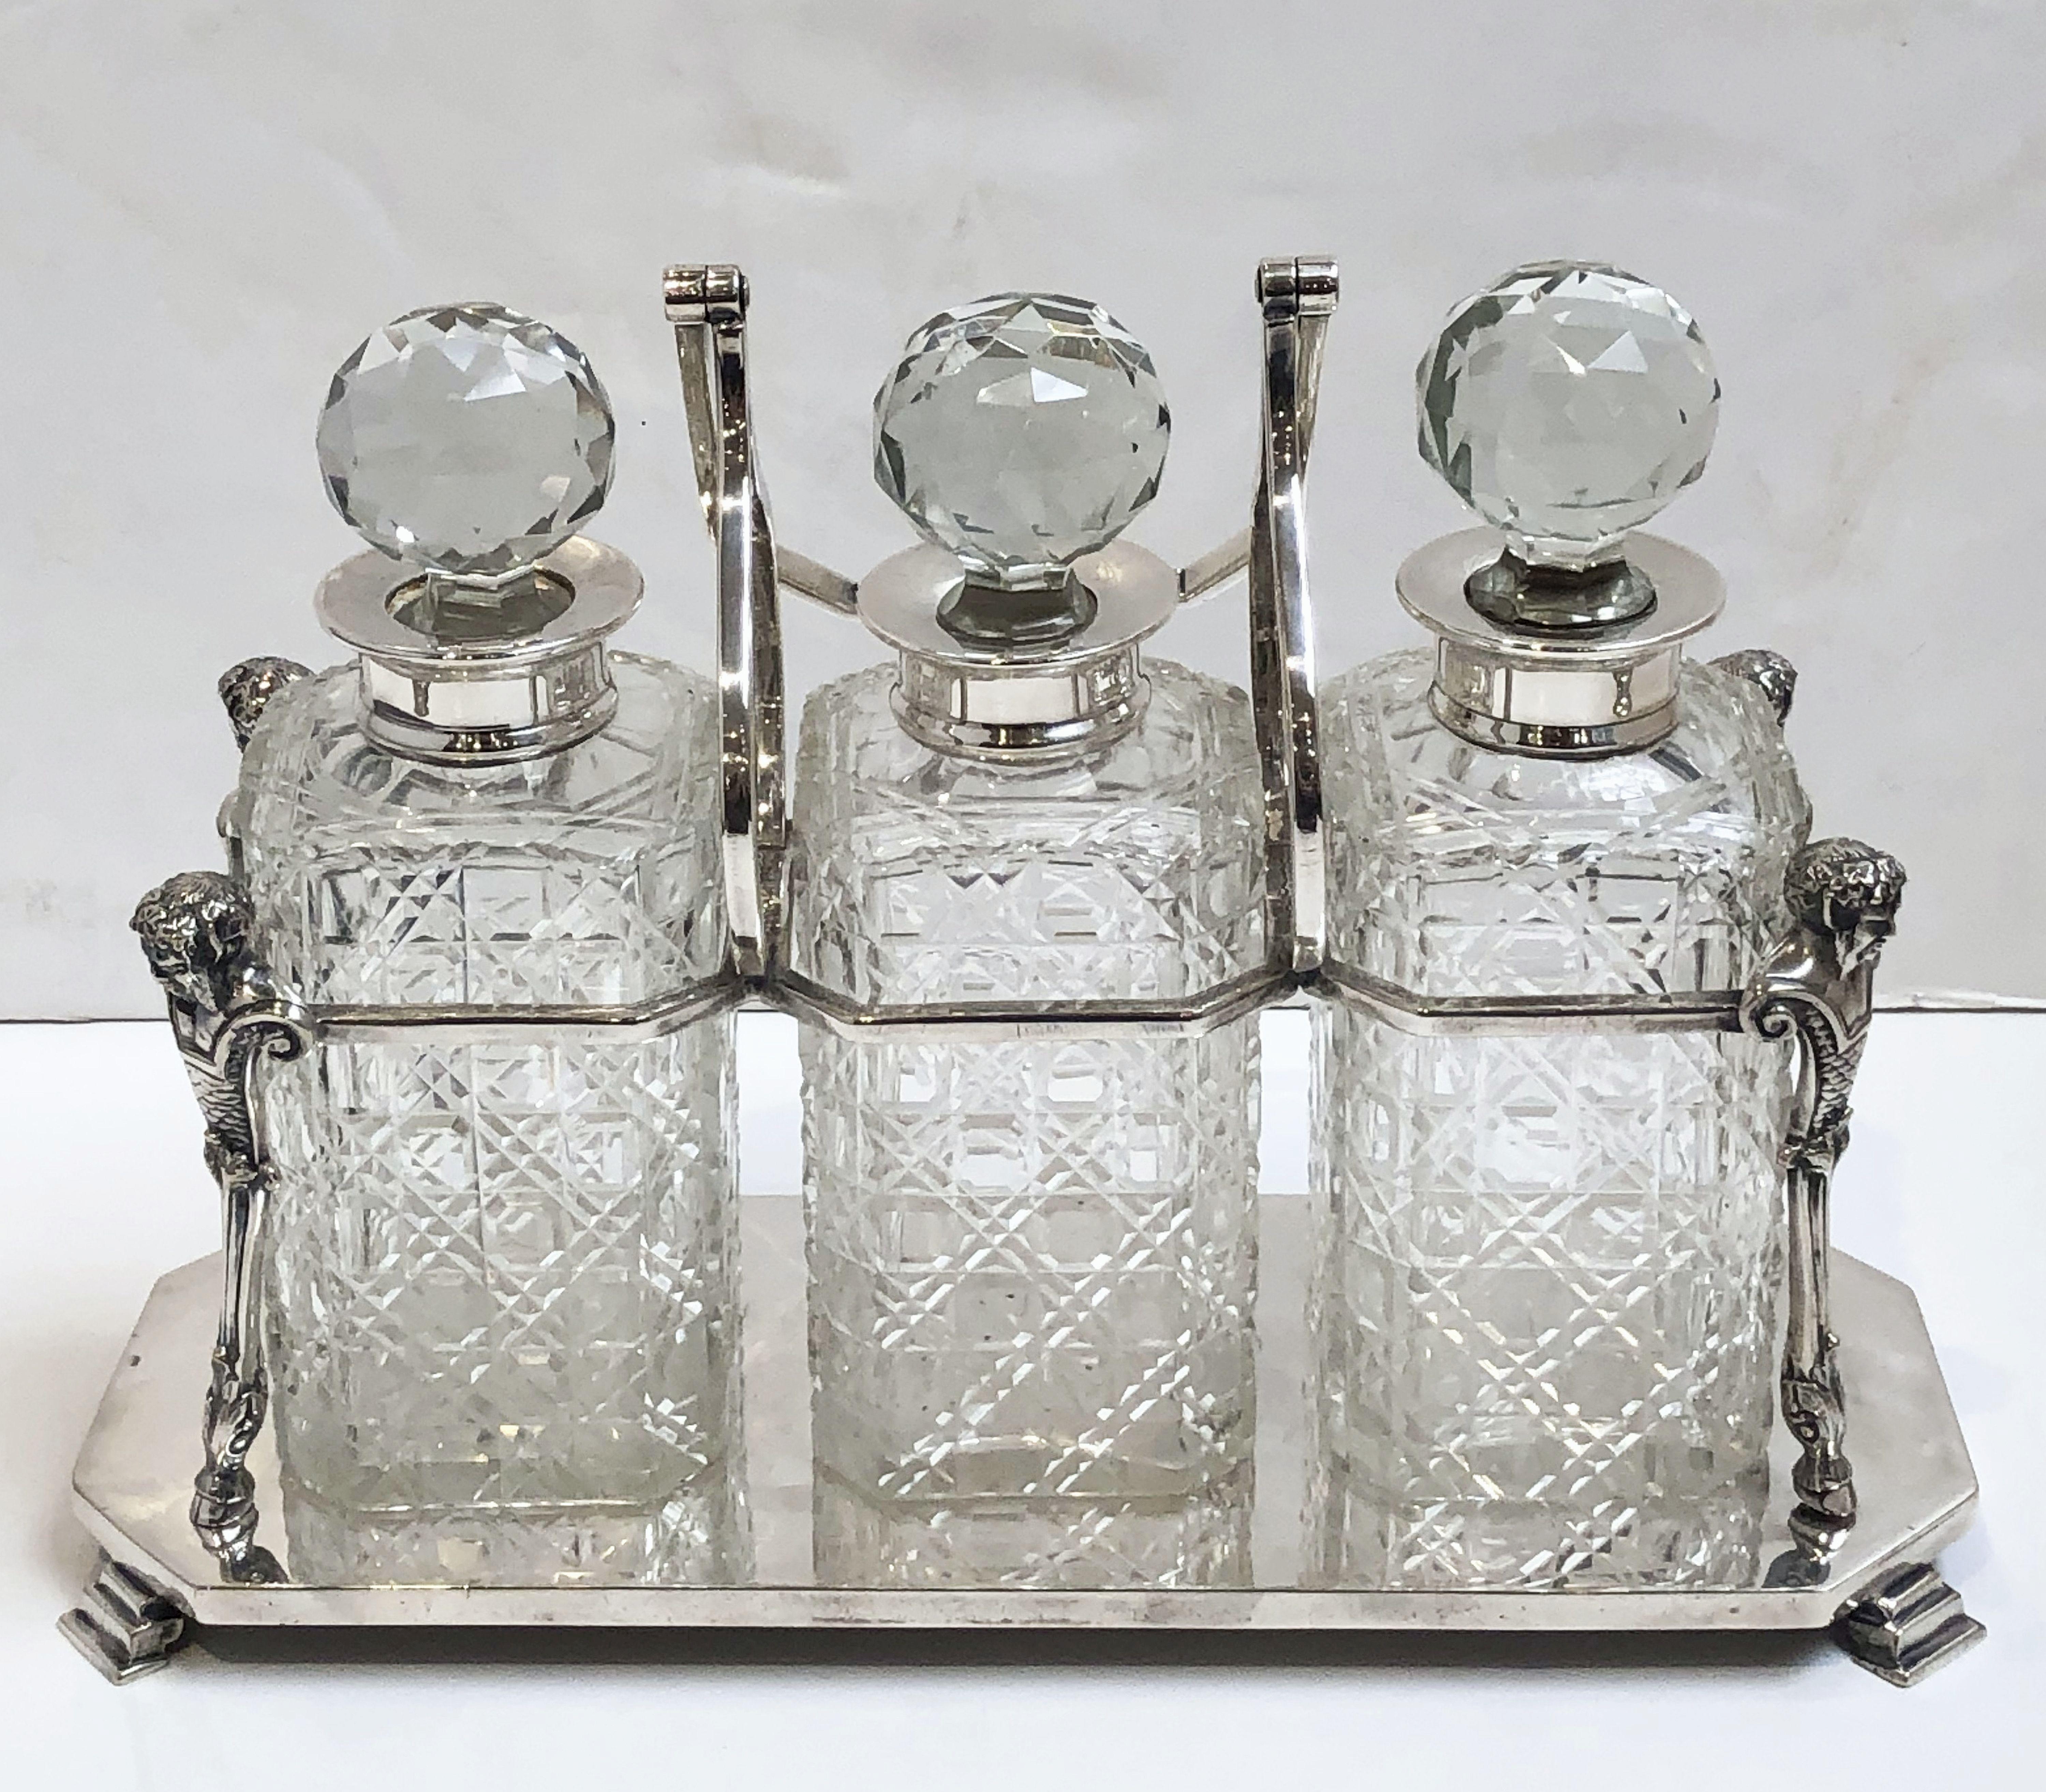 A handsome English three bottle Tantalus drinks or spirits set, of fine plate silver, fitted with three silver mounted crystal cut hobnail and lozenge decorated square decanters and faceted stoppers, on a rectangular base with classical busts at